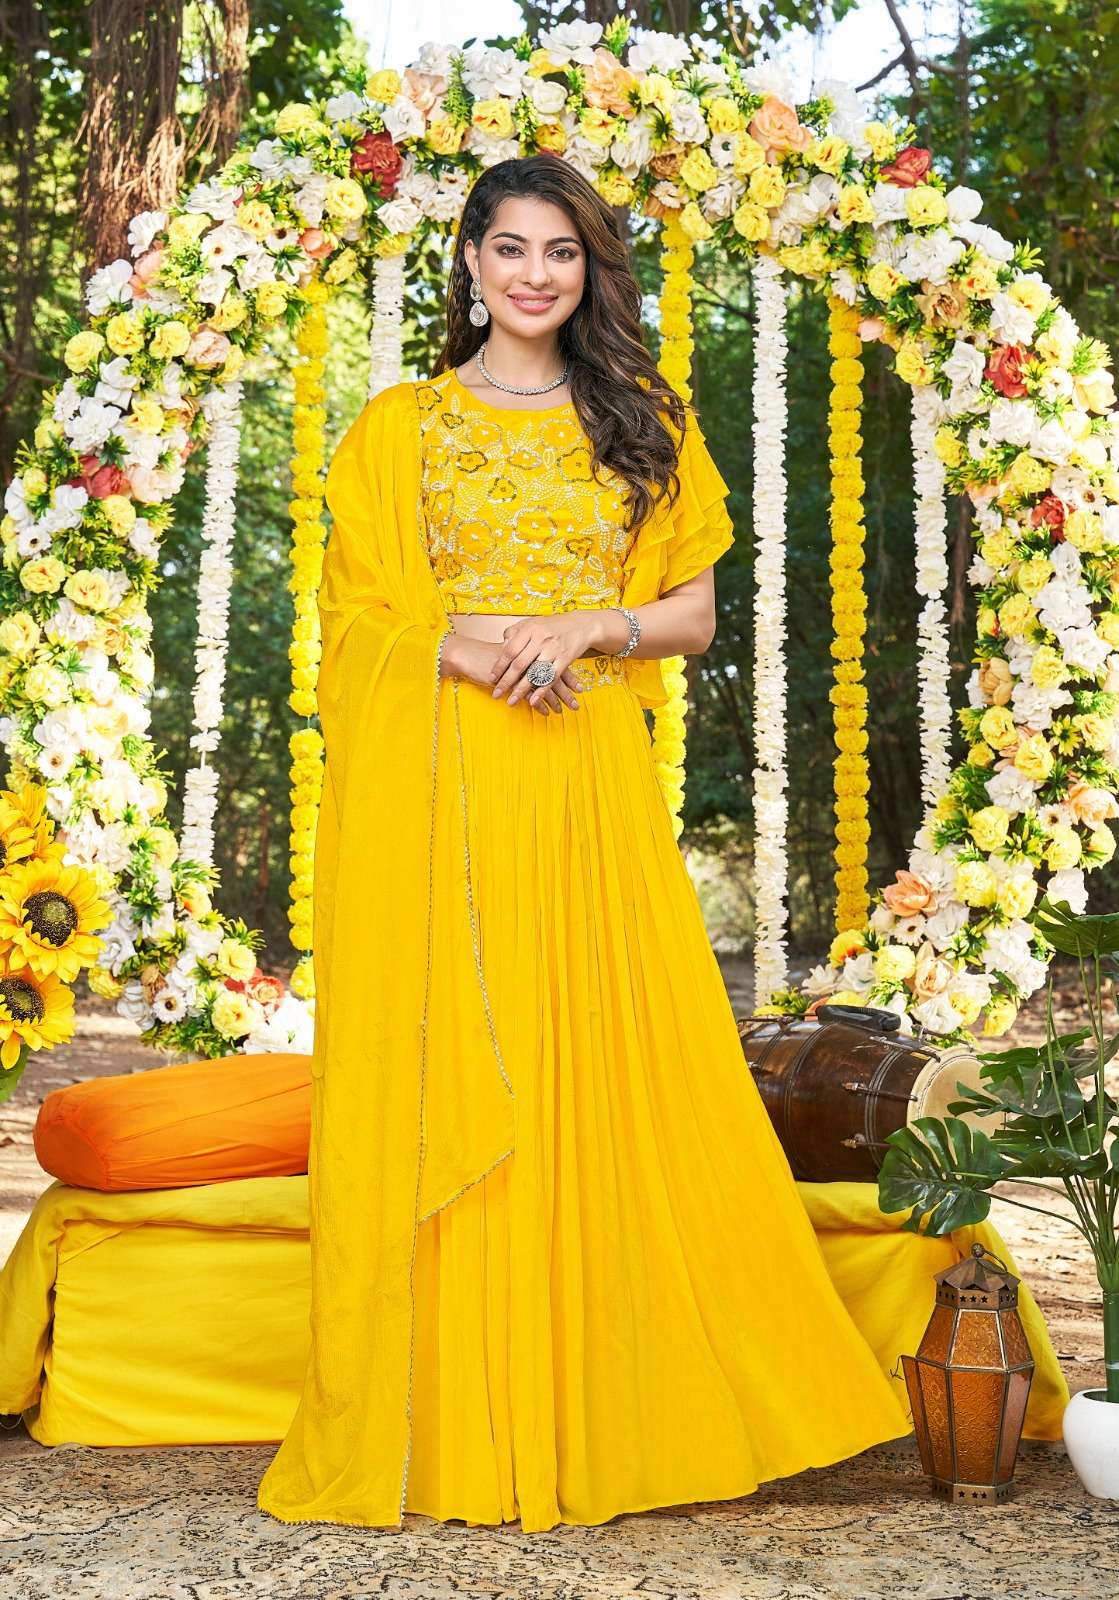 Mayun outfit inspo for brides sister/ cousin | Haldi dress, Haldi function  dress, Function dresses